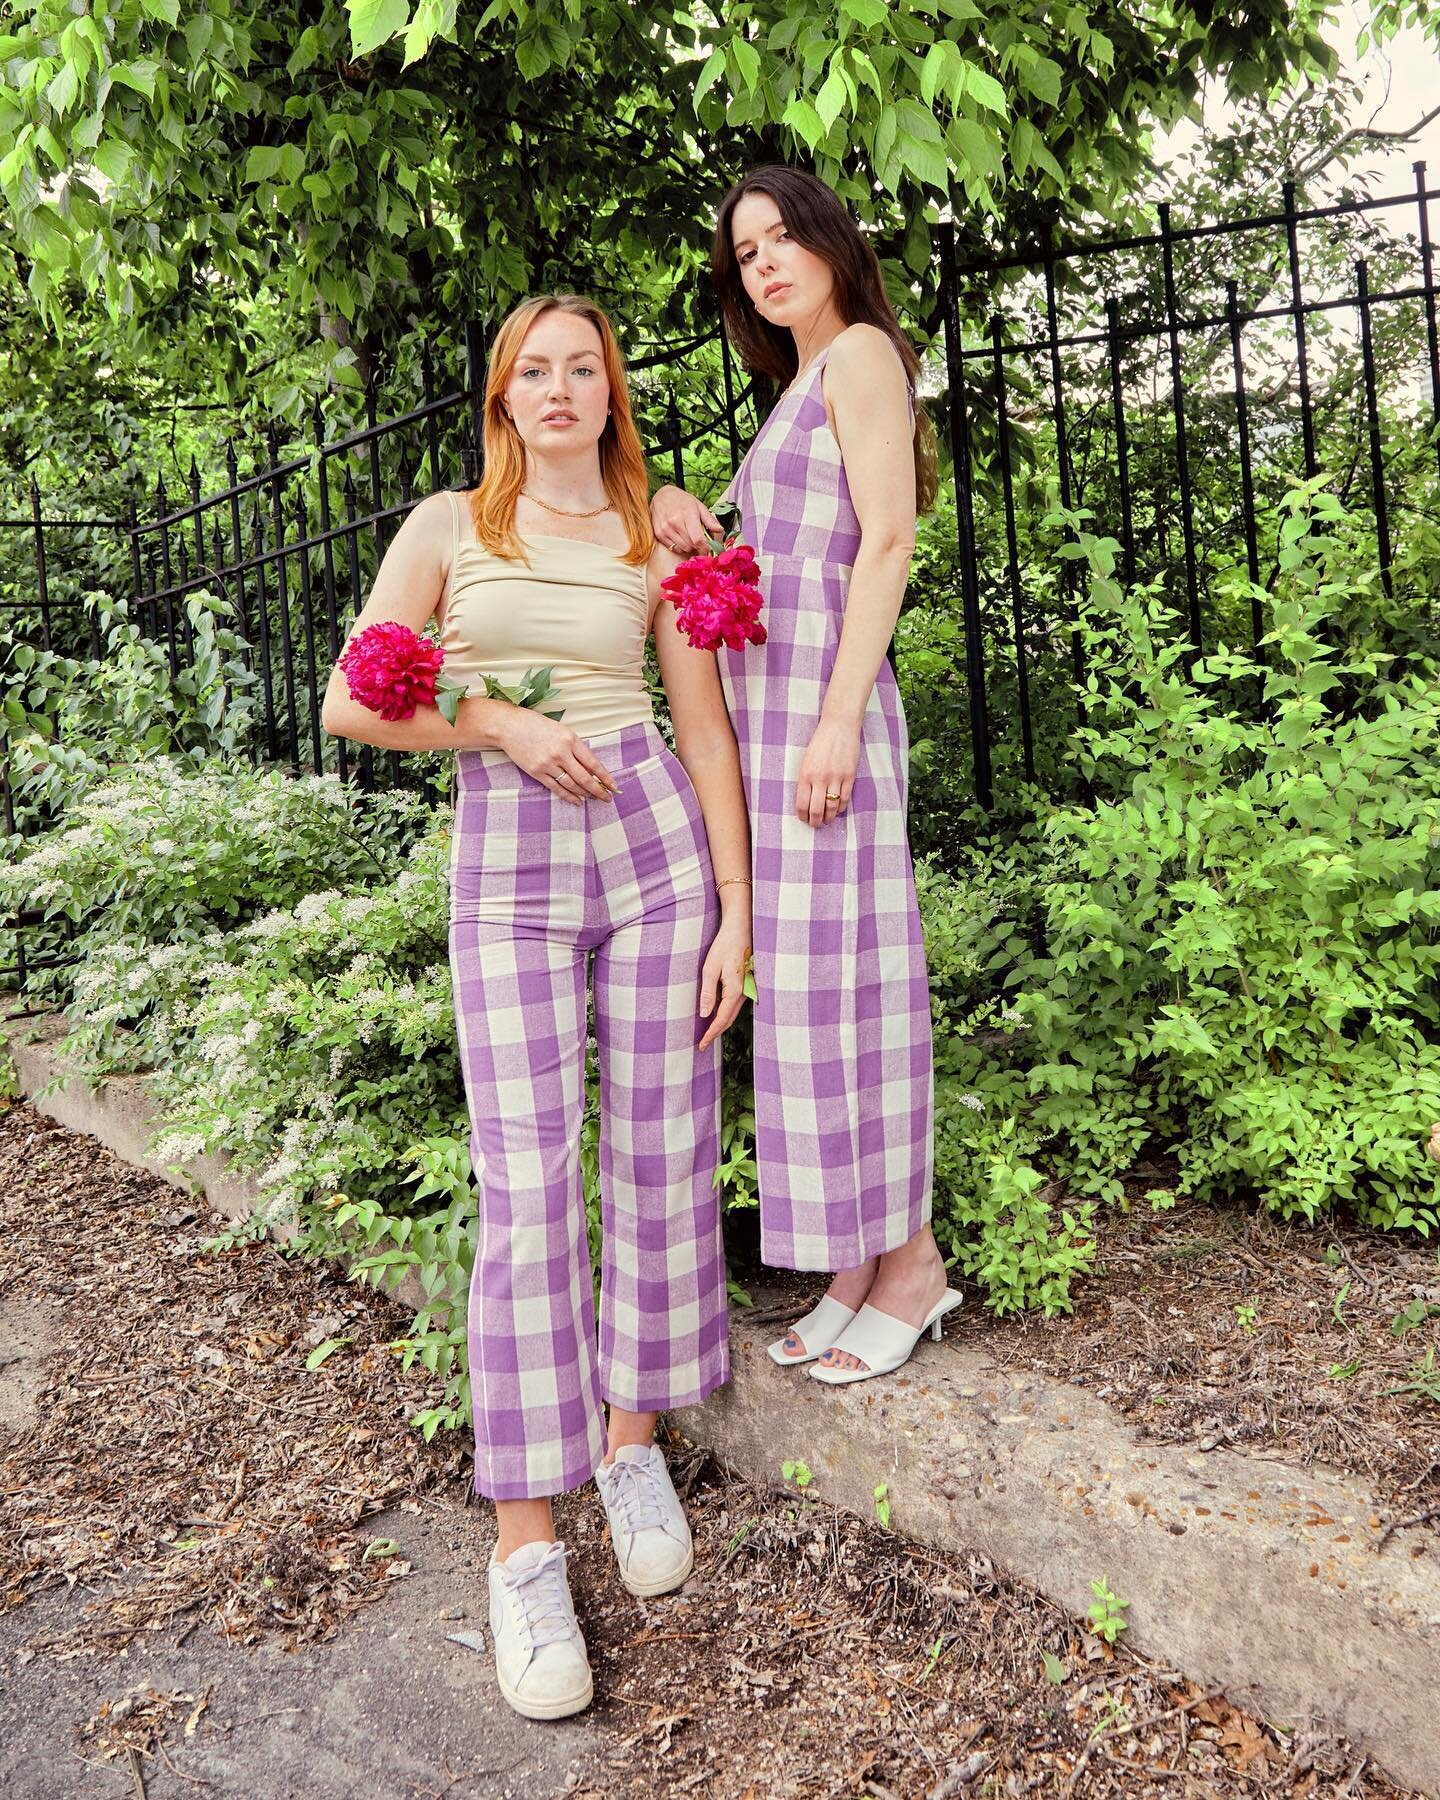 ✨SS23 New Arrivals ✨ Gorgeous campaign of our latest collection in the shop shot by @monicaescamillaphotograph 🌸
Pieces to carry you from spring to summer for all the occasions✨

Modeled by 🤍
@eileenruth67 
@kennedy.grace16 
@ash.on.display 
@kathy